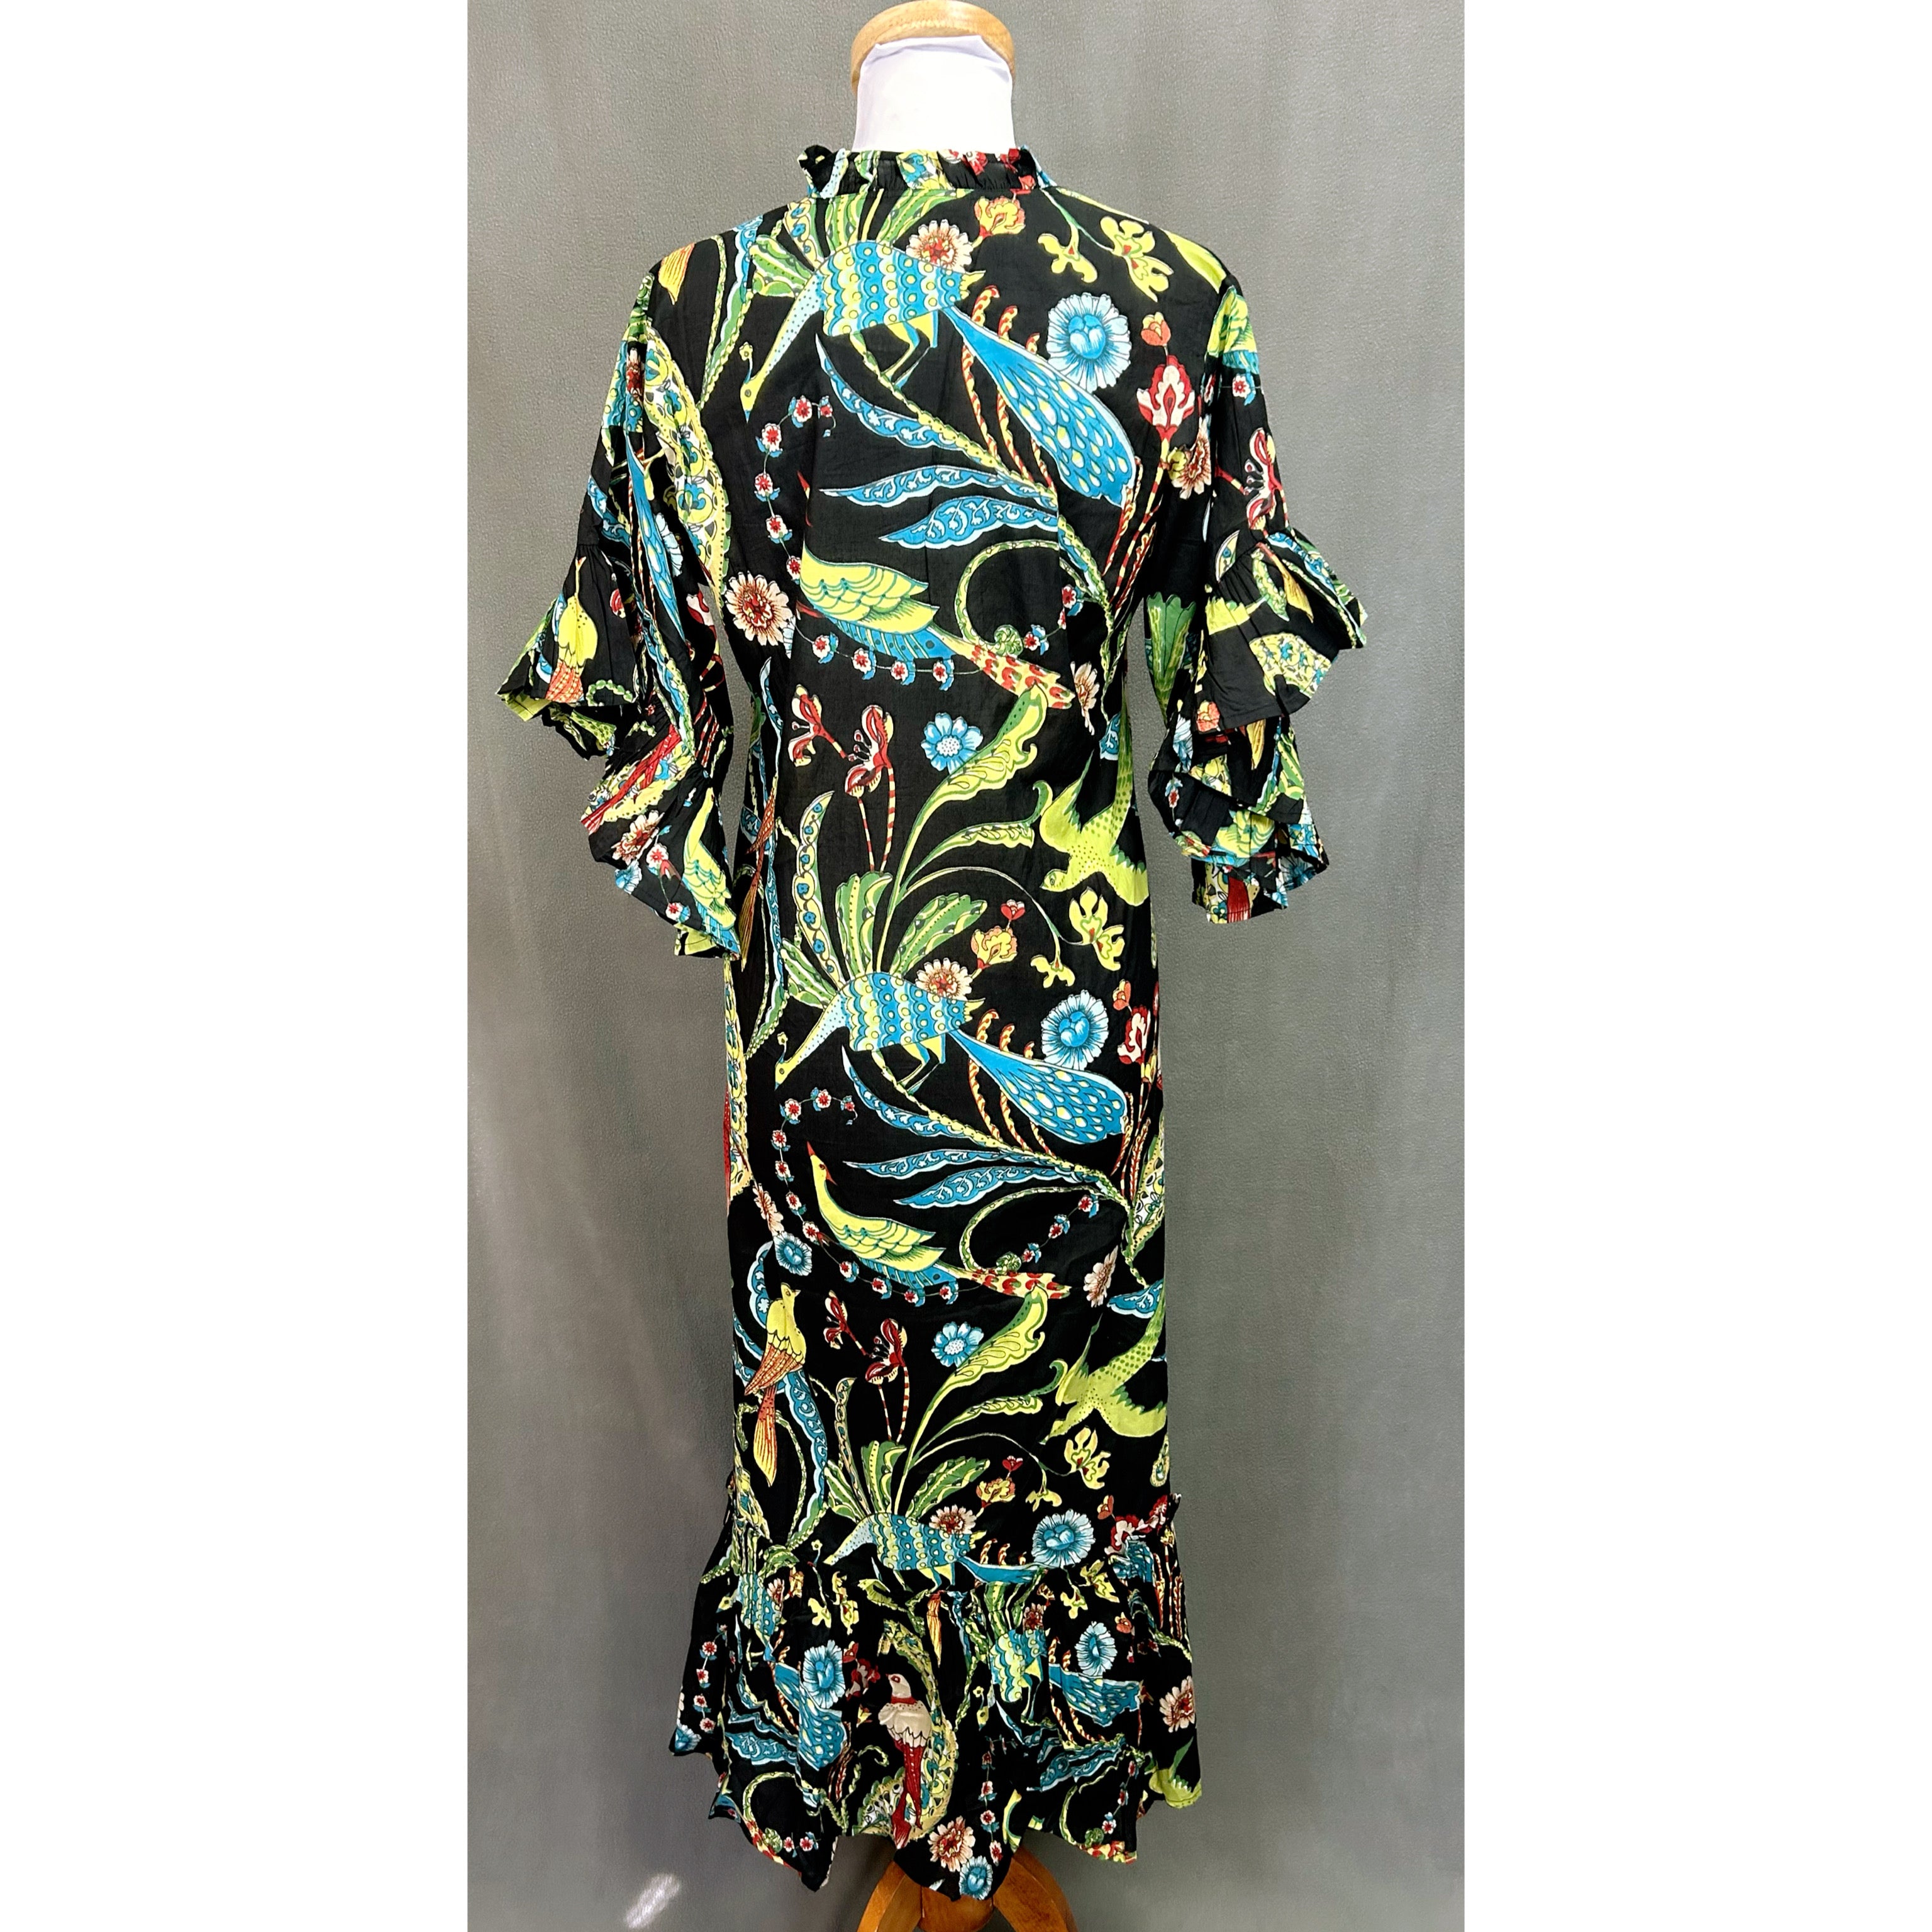 Fitzroy & Willa black print dress, size S, NEW WITH TAGS!